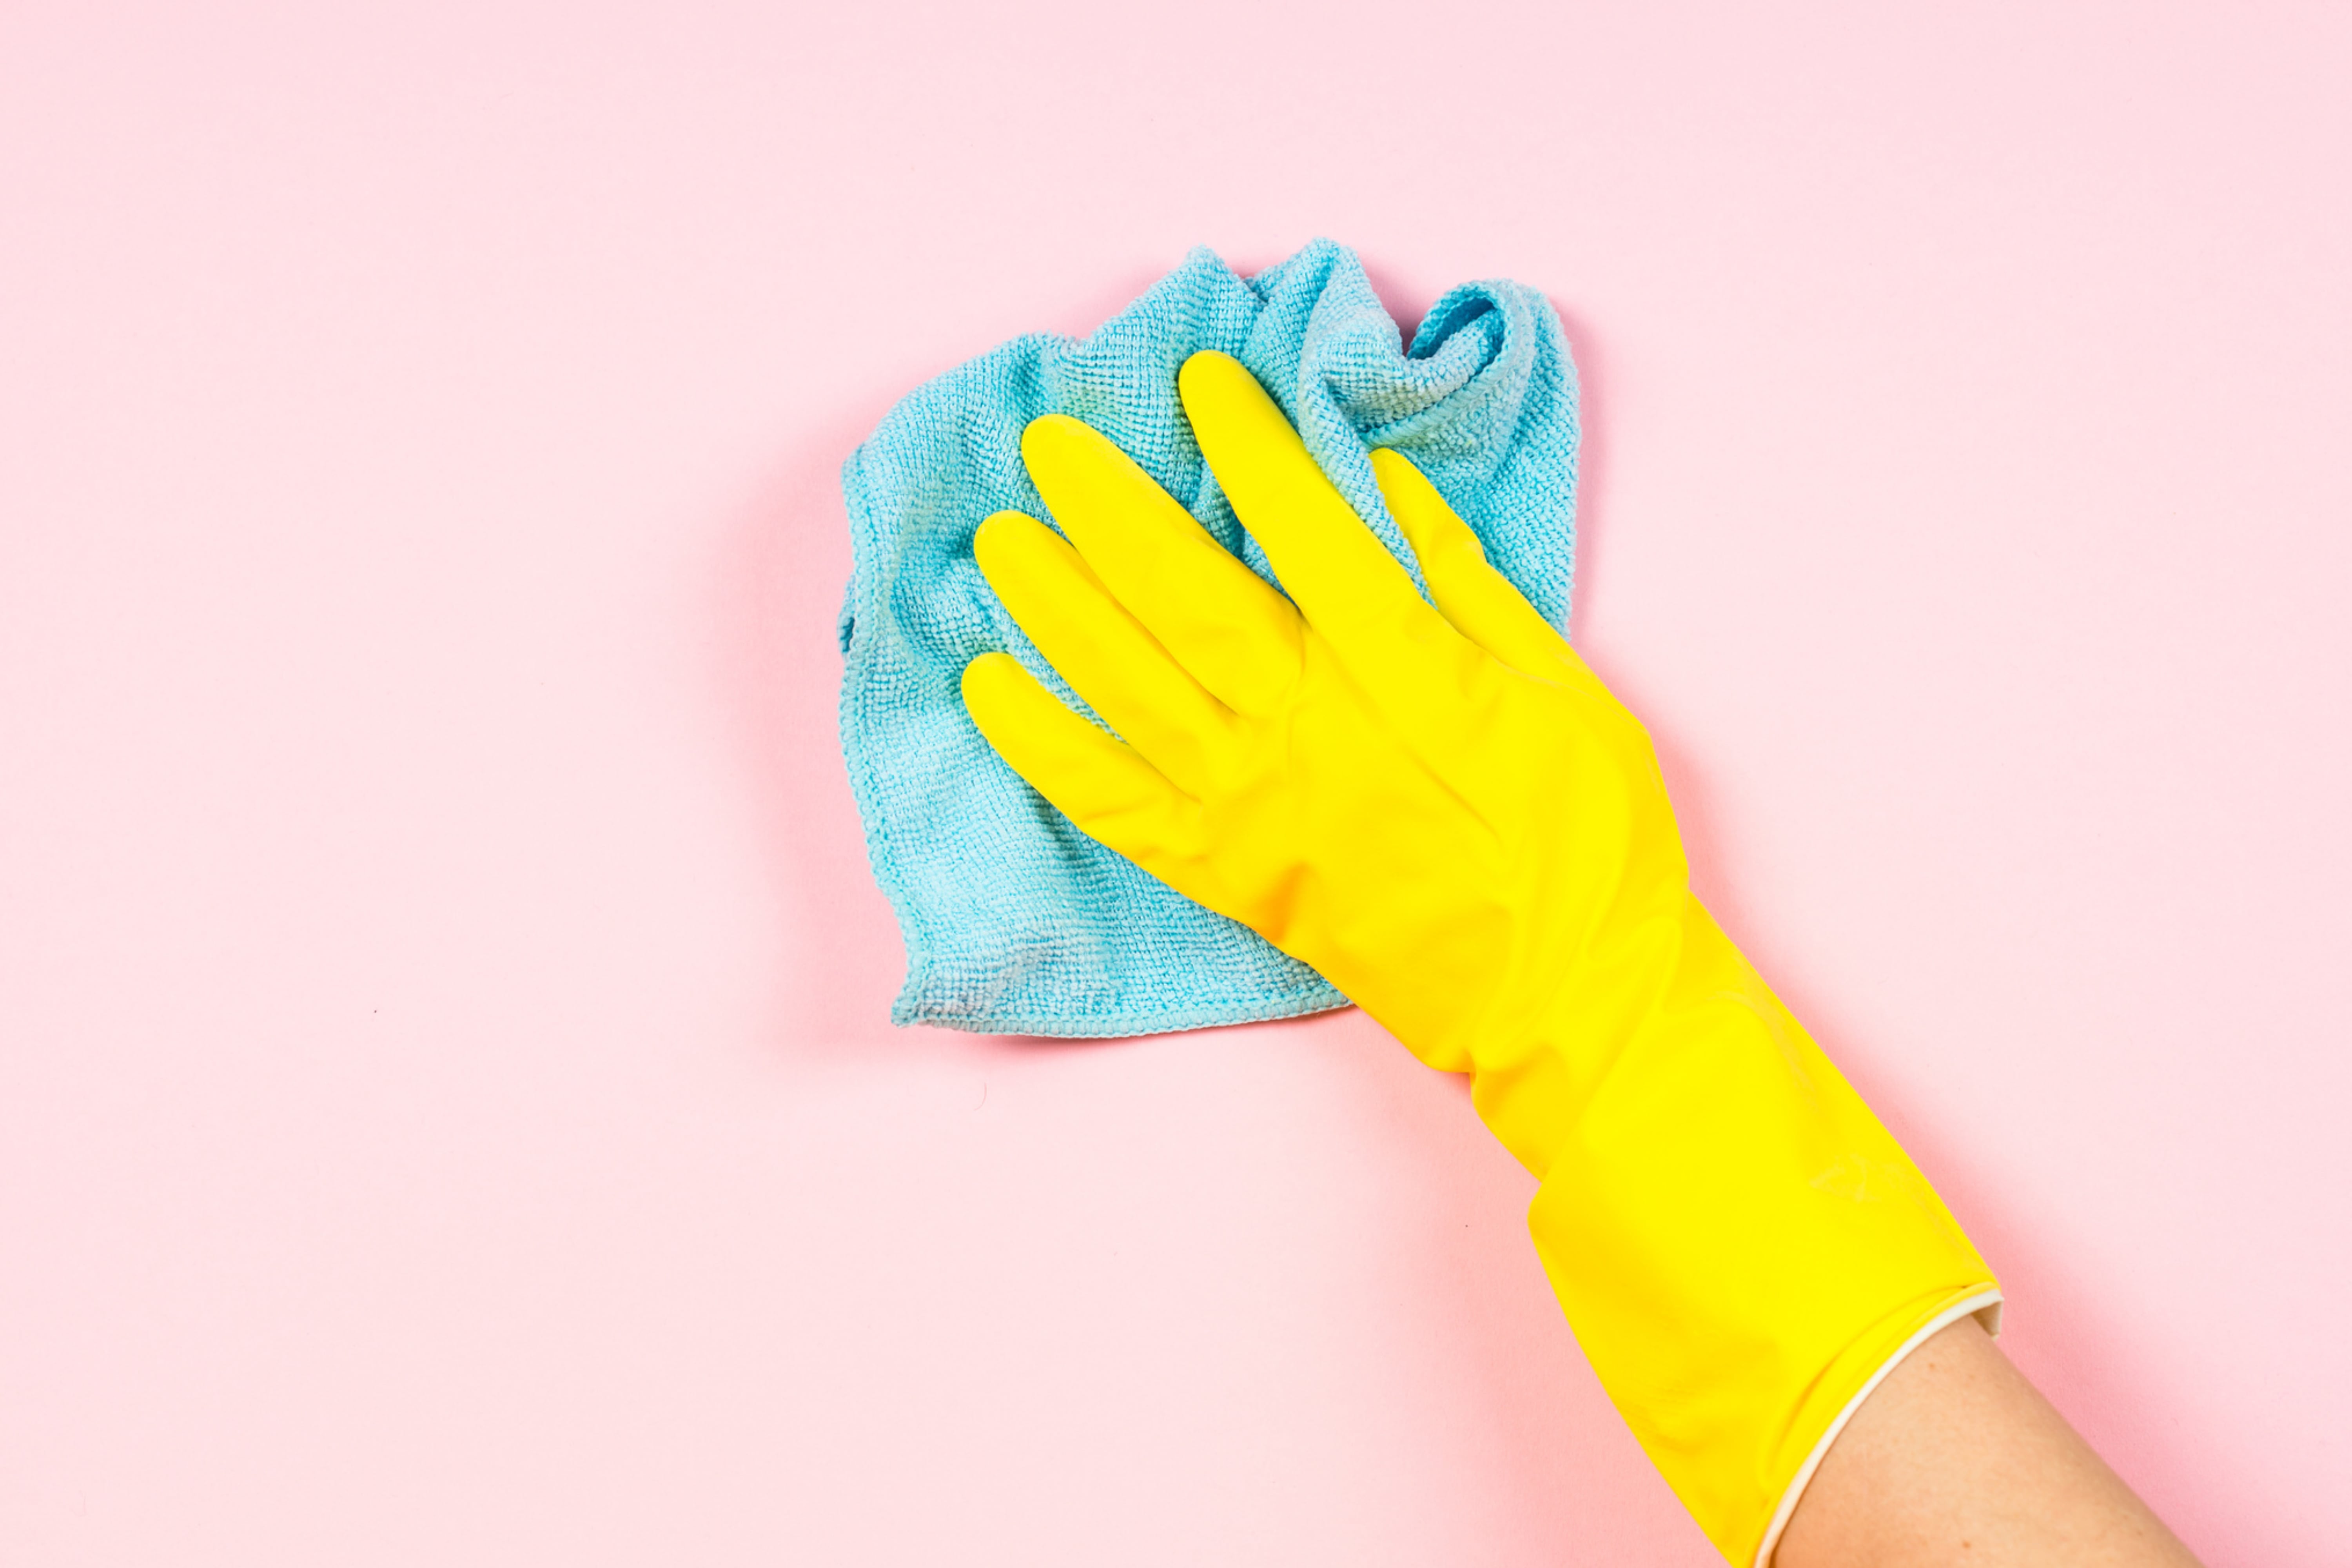 Surprising Effects Cleaning Has On Your Home and Life